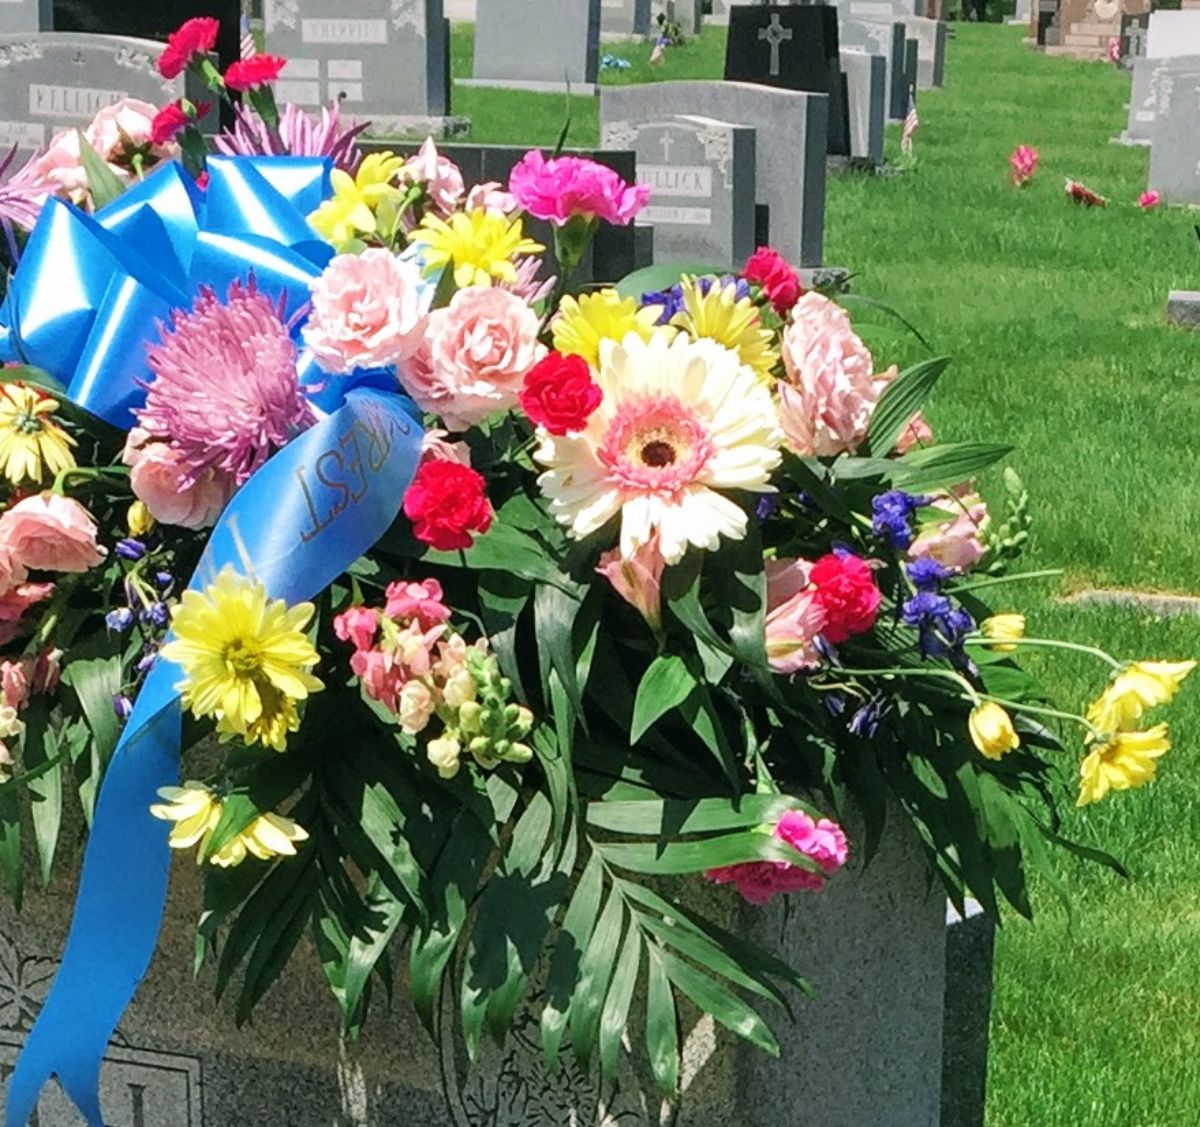 Funeral flowers on a sunny day at the cemetery